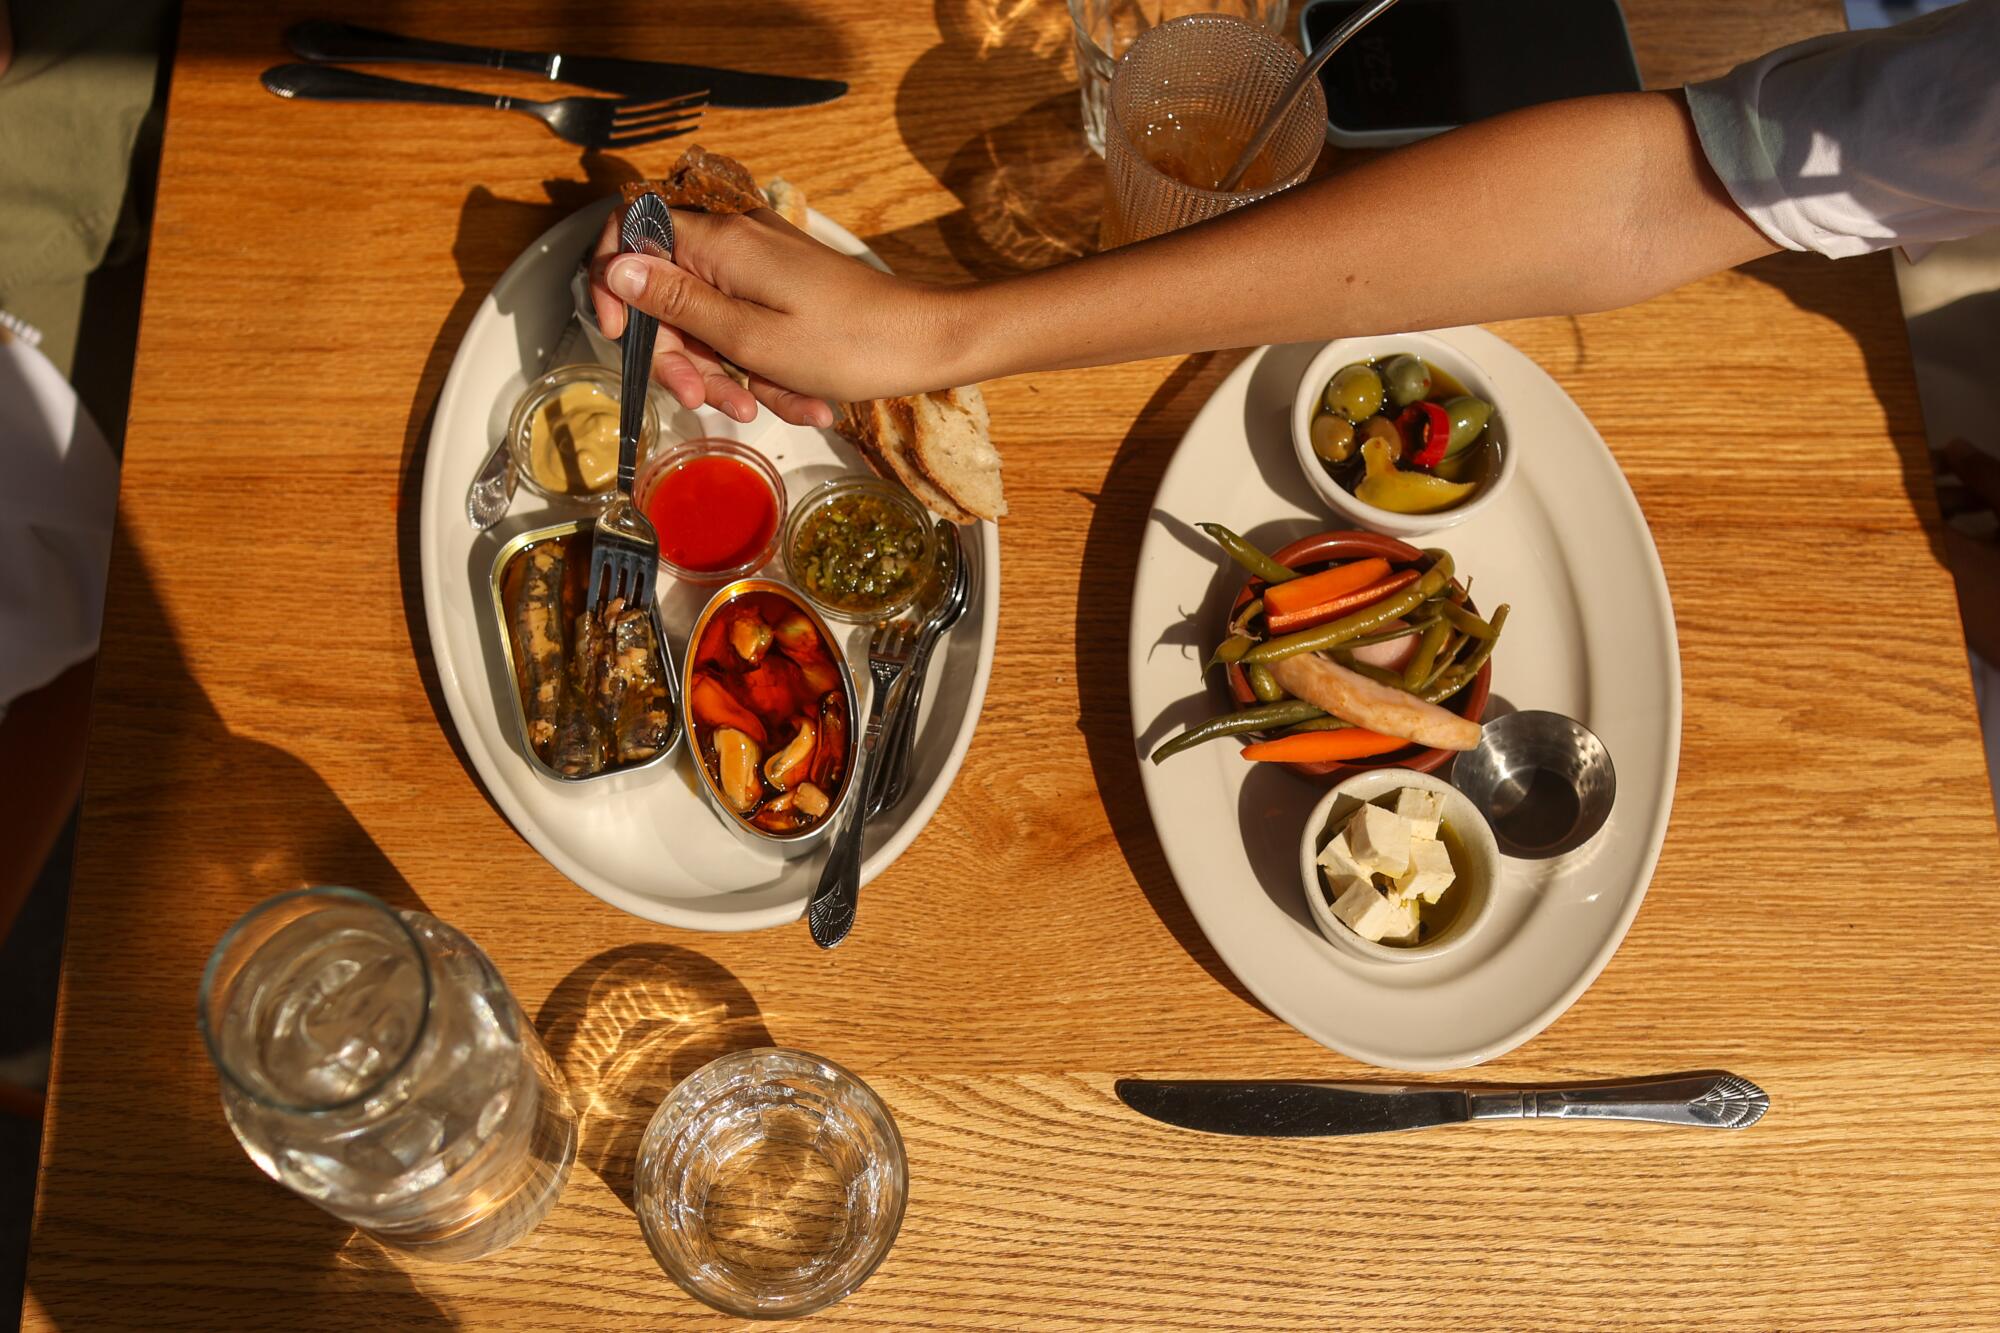 A variety of food on a wooden table.